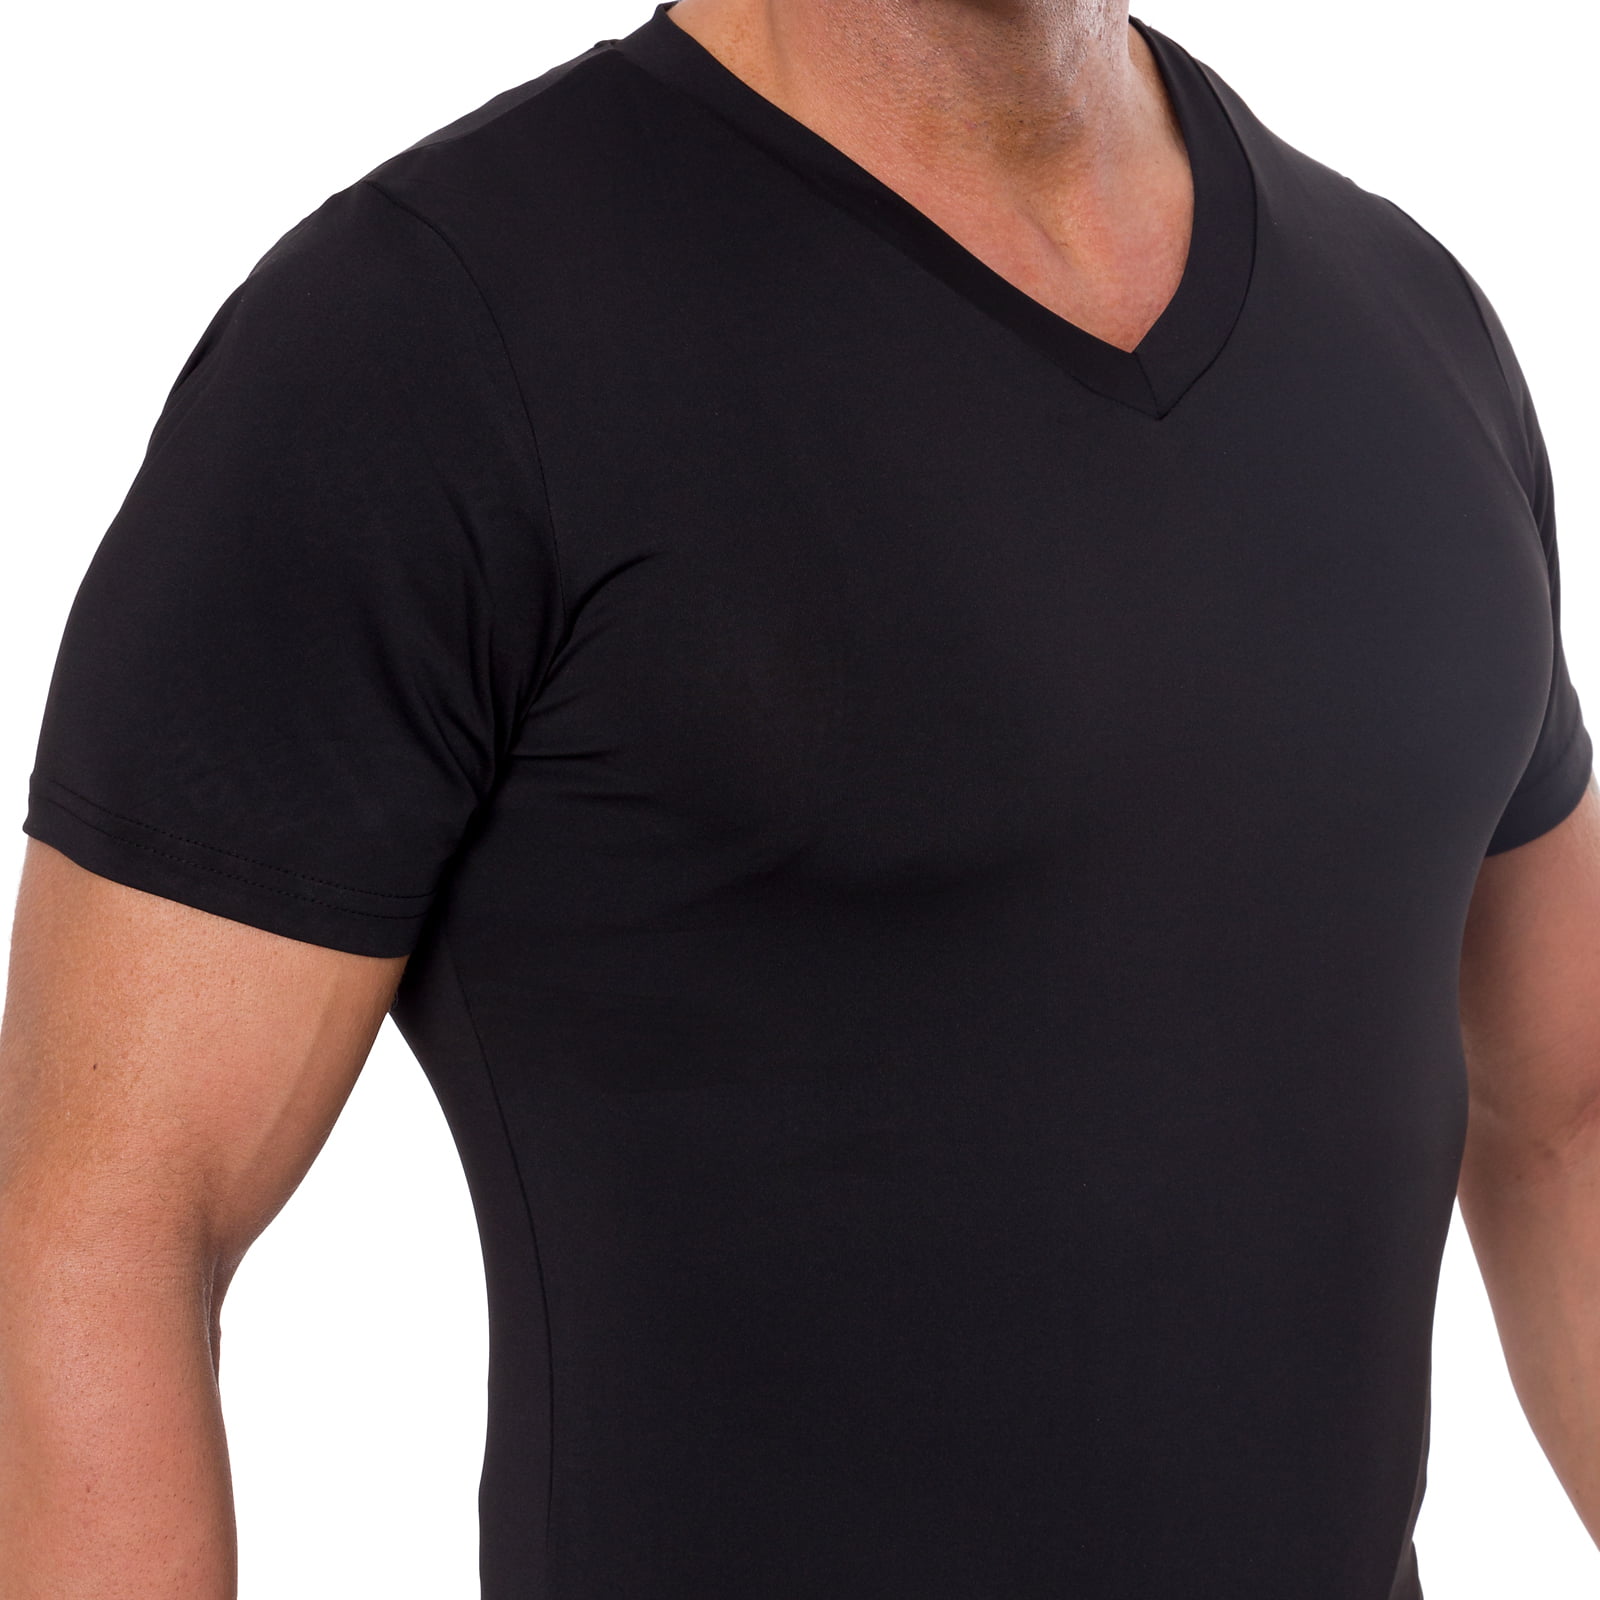 +MD Mens Slimming Light Compression Crew-Neck Athletic Shirt Short Sleeve Body Shaper Sport T-Shirt for Weight Loss